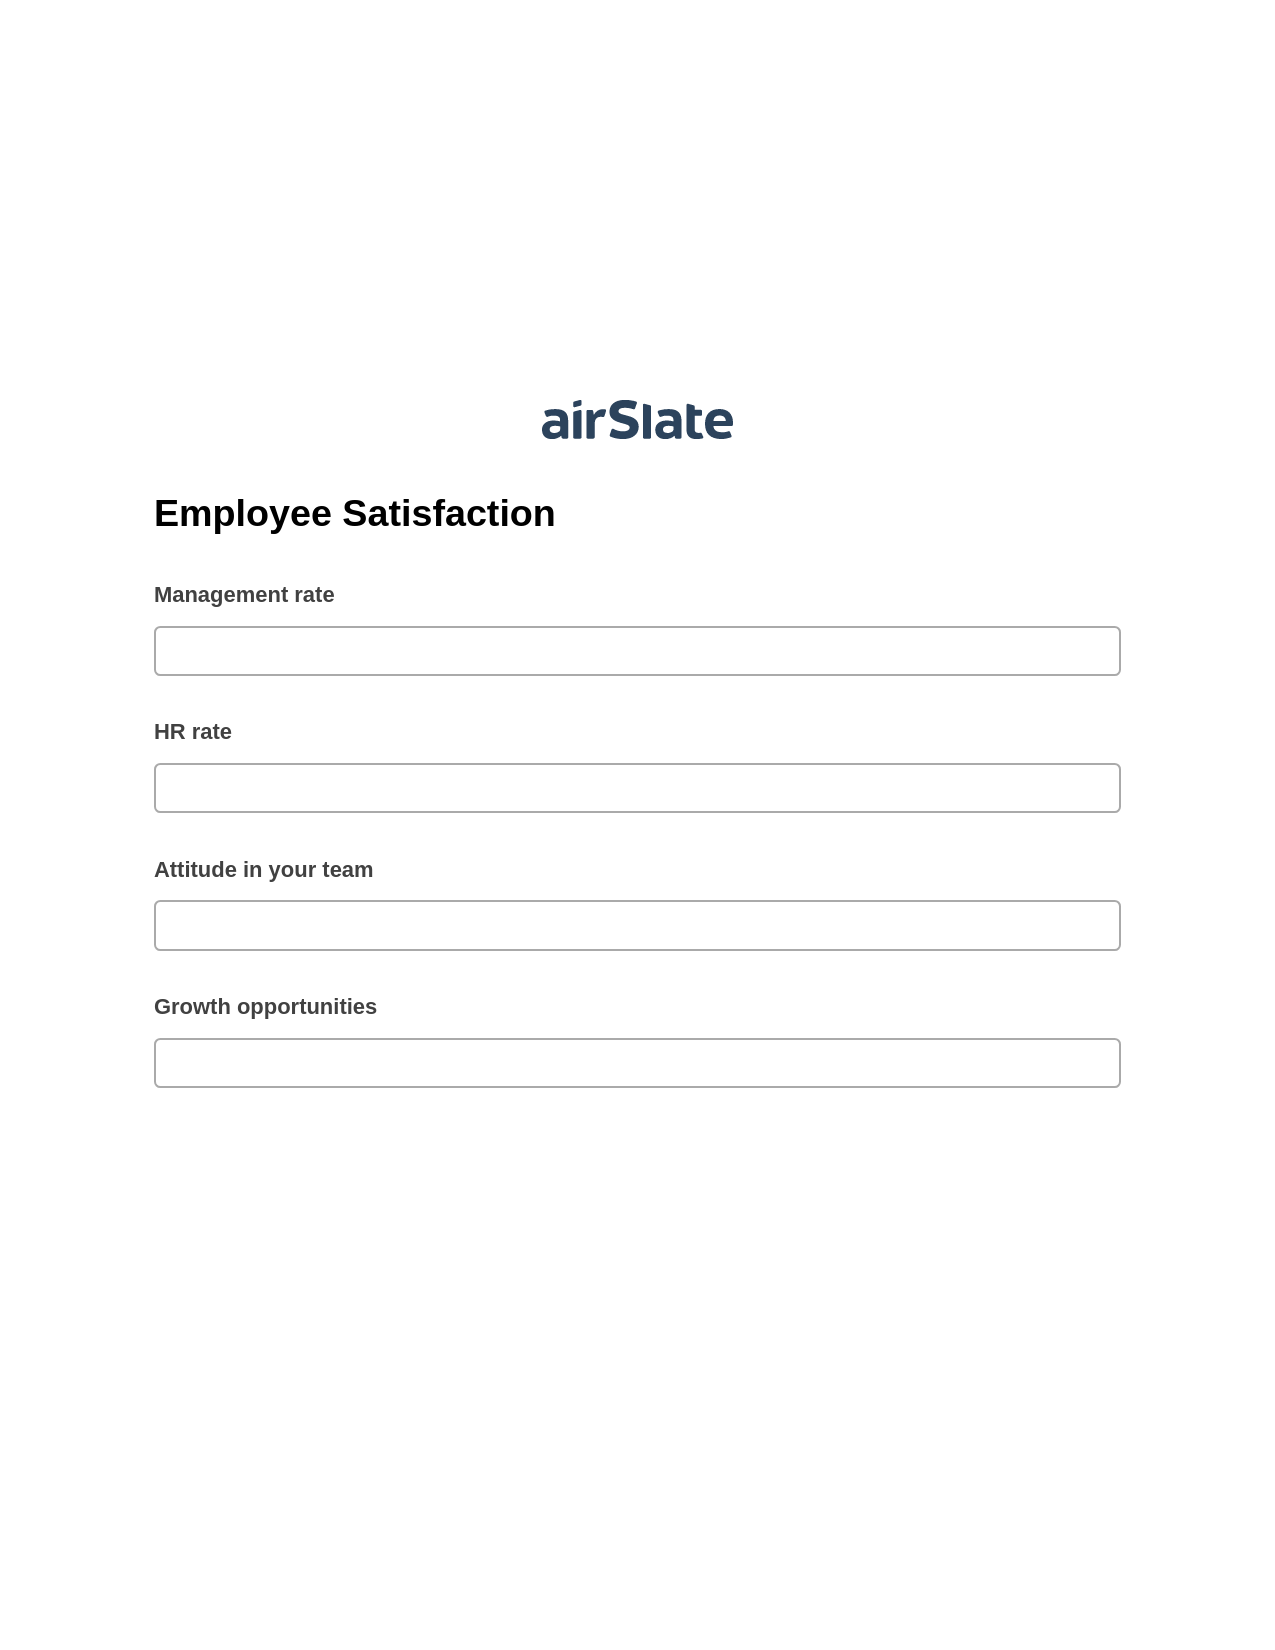 Employee Satisfaction Pre-fill from Google Sheets Bot, Create Salesforce Record Bot, Archive to SharePoint Folder Bot